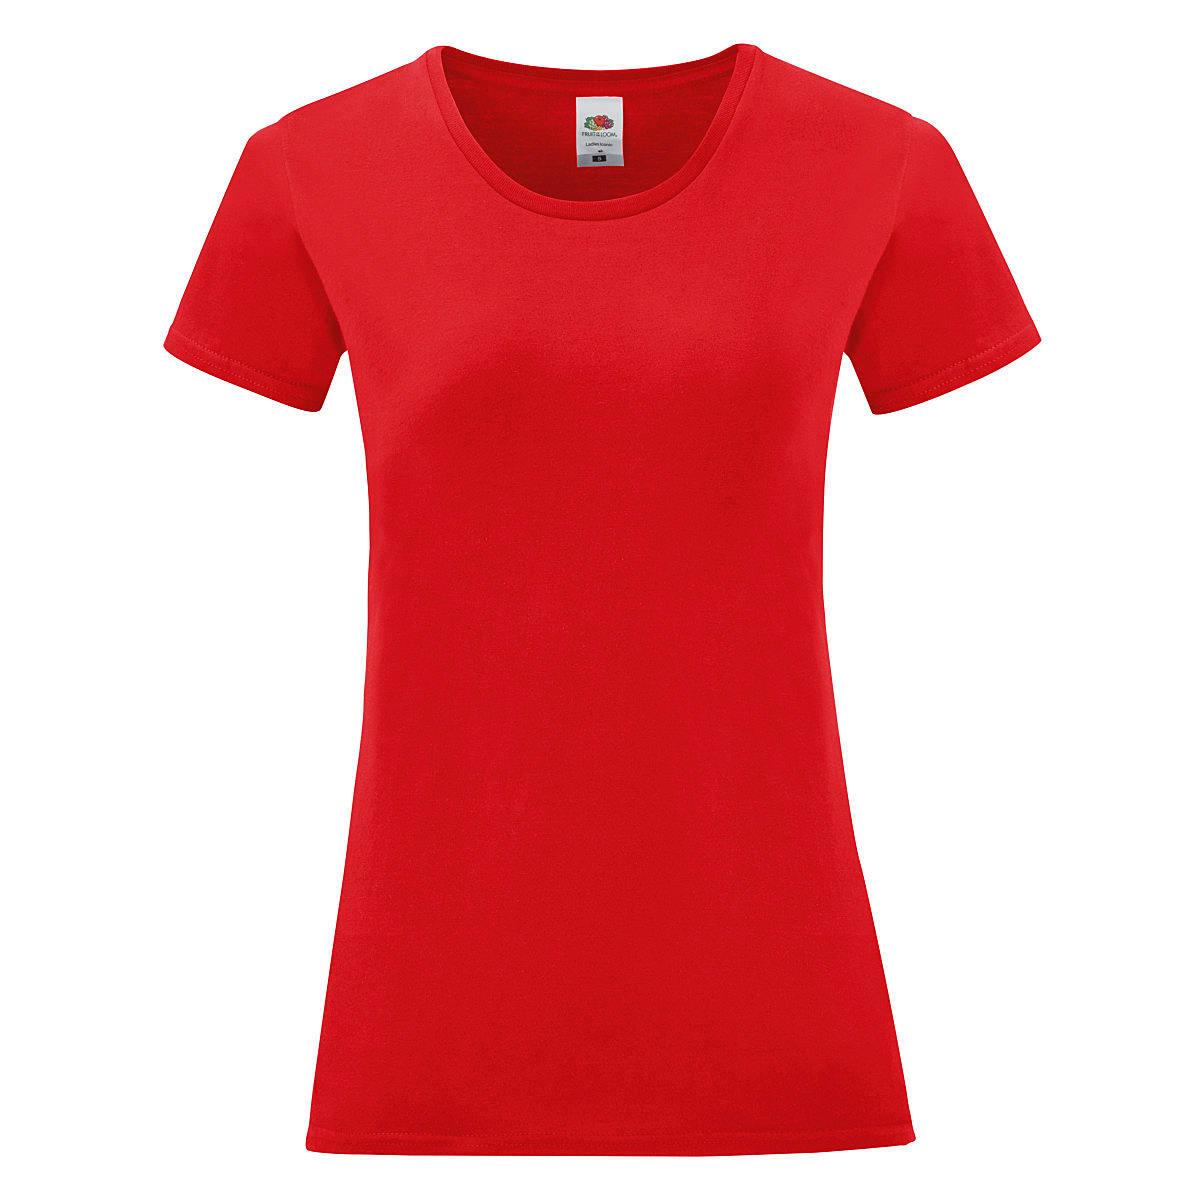 Fruit Of The Loom Womens Iconic T-Shirt in Red (Product Code: 61432)